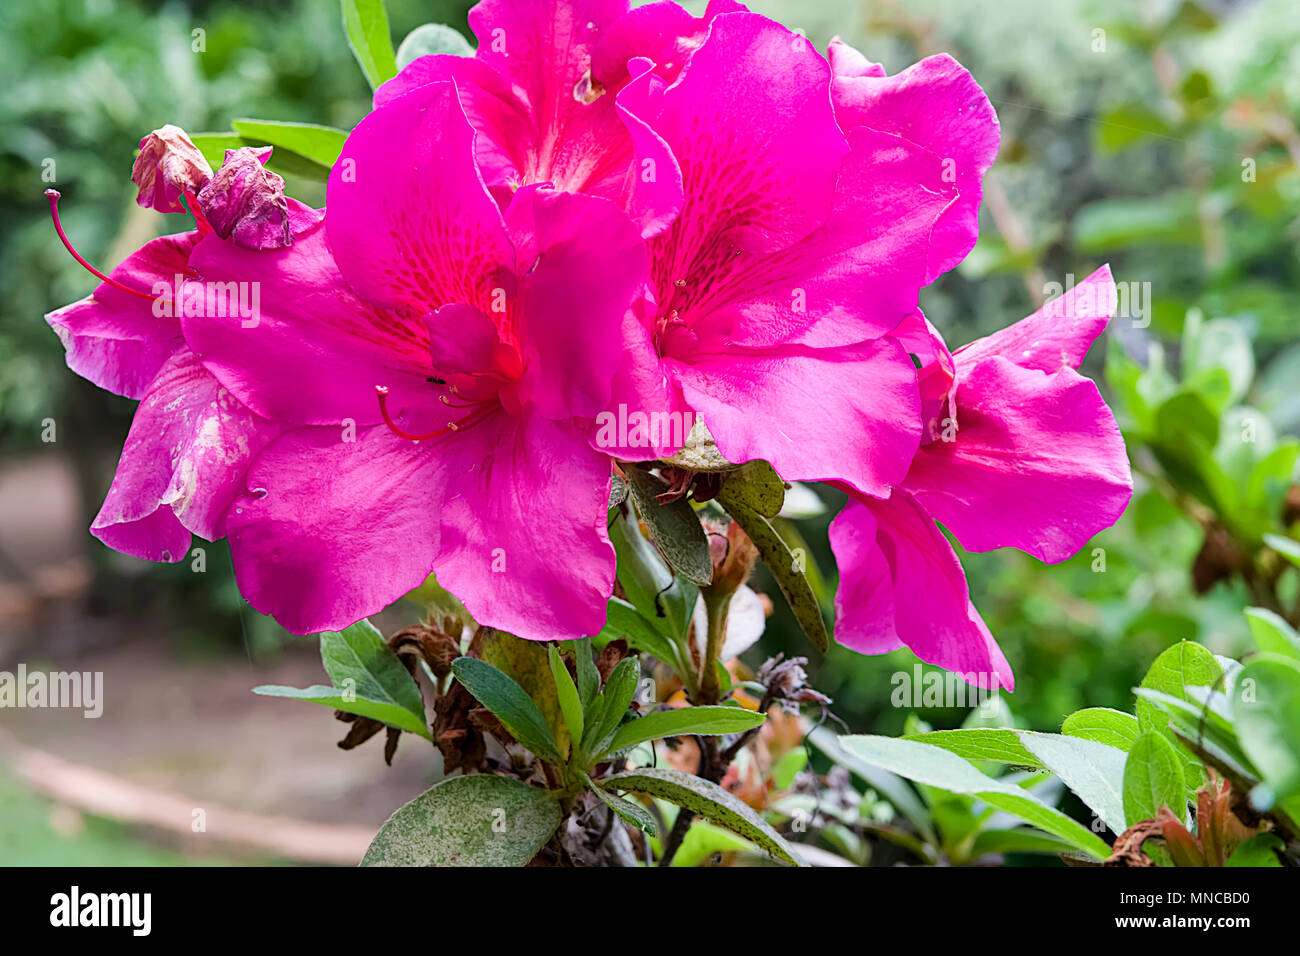 Azaleas are flowering shrubs in the genus Rhododendron, grown in all regions of Australia and the UK they are very spectacular when in full bloom Stock Photo